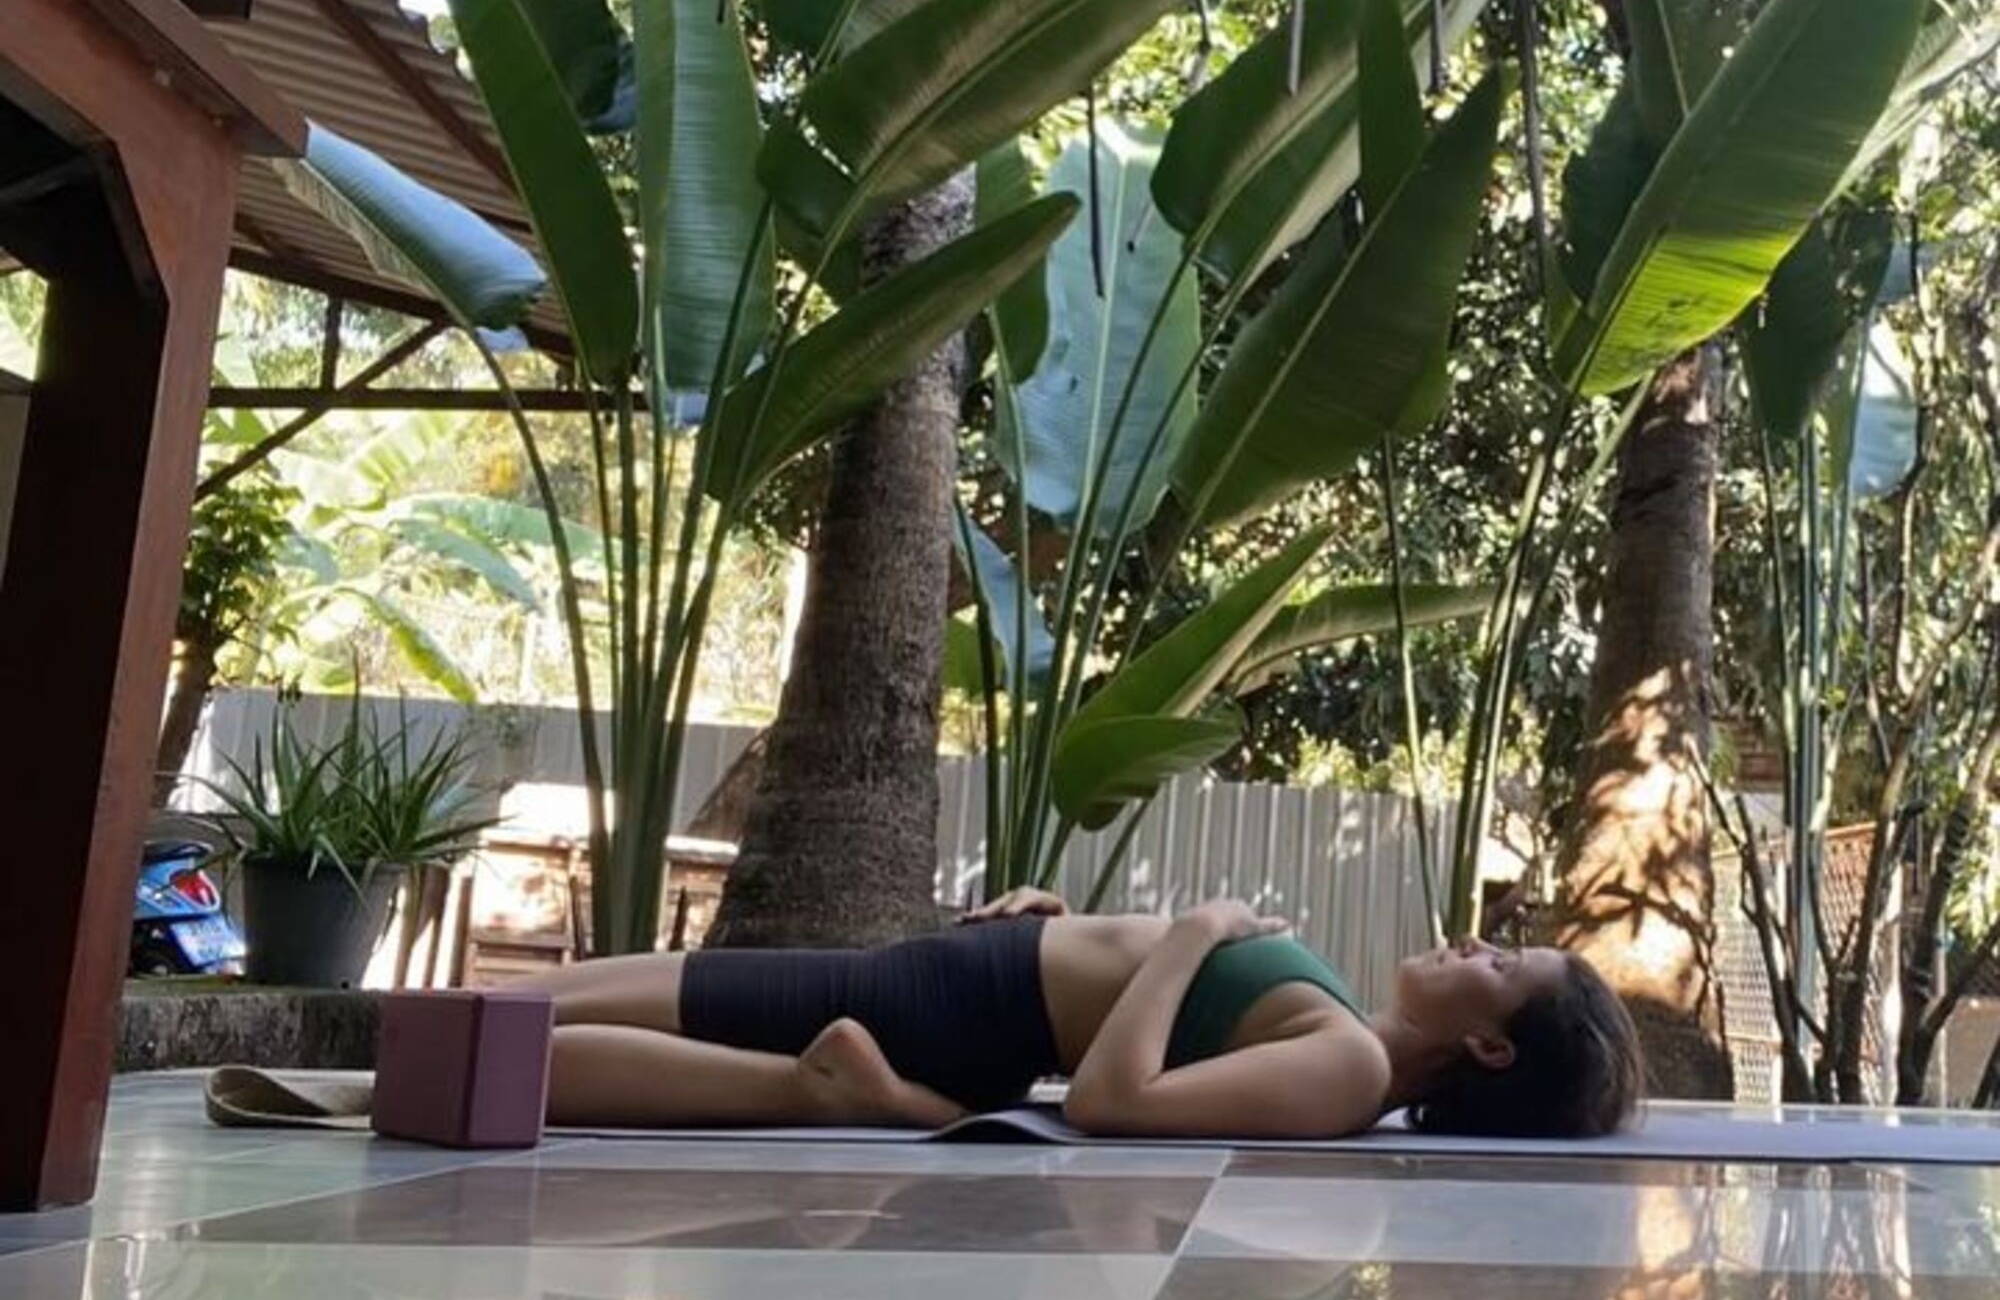  woman in a green sports bra and black bike shorts laying on her back in a yoga pose